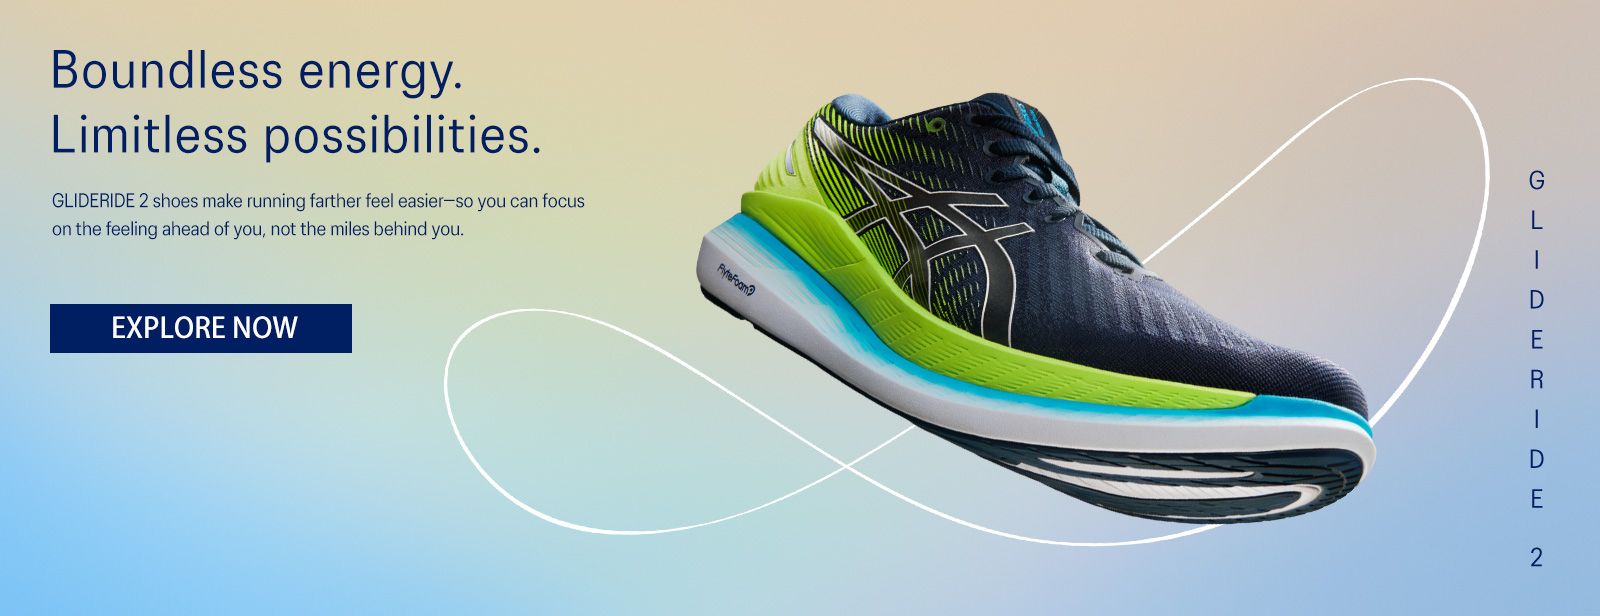 asics shoes for walking